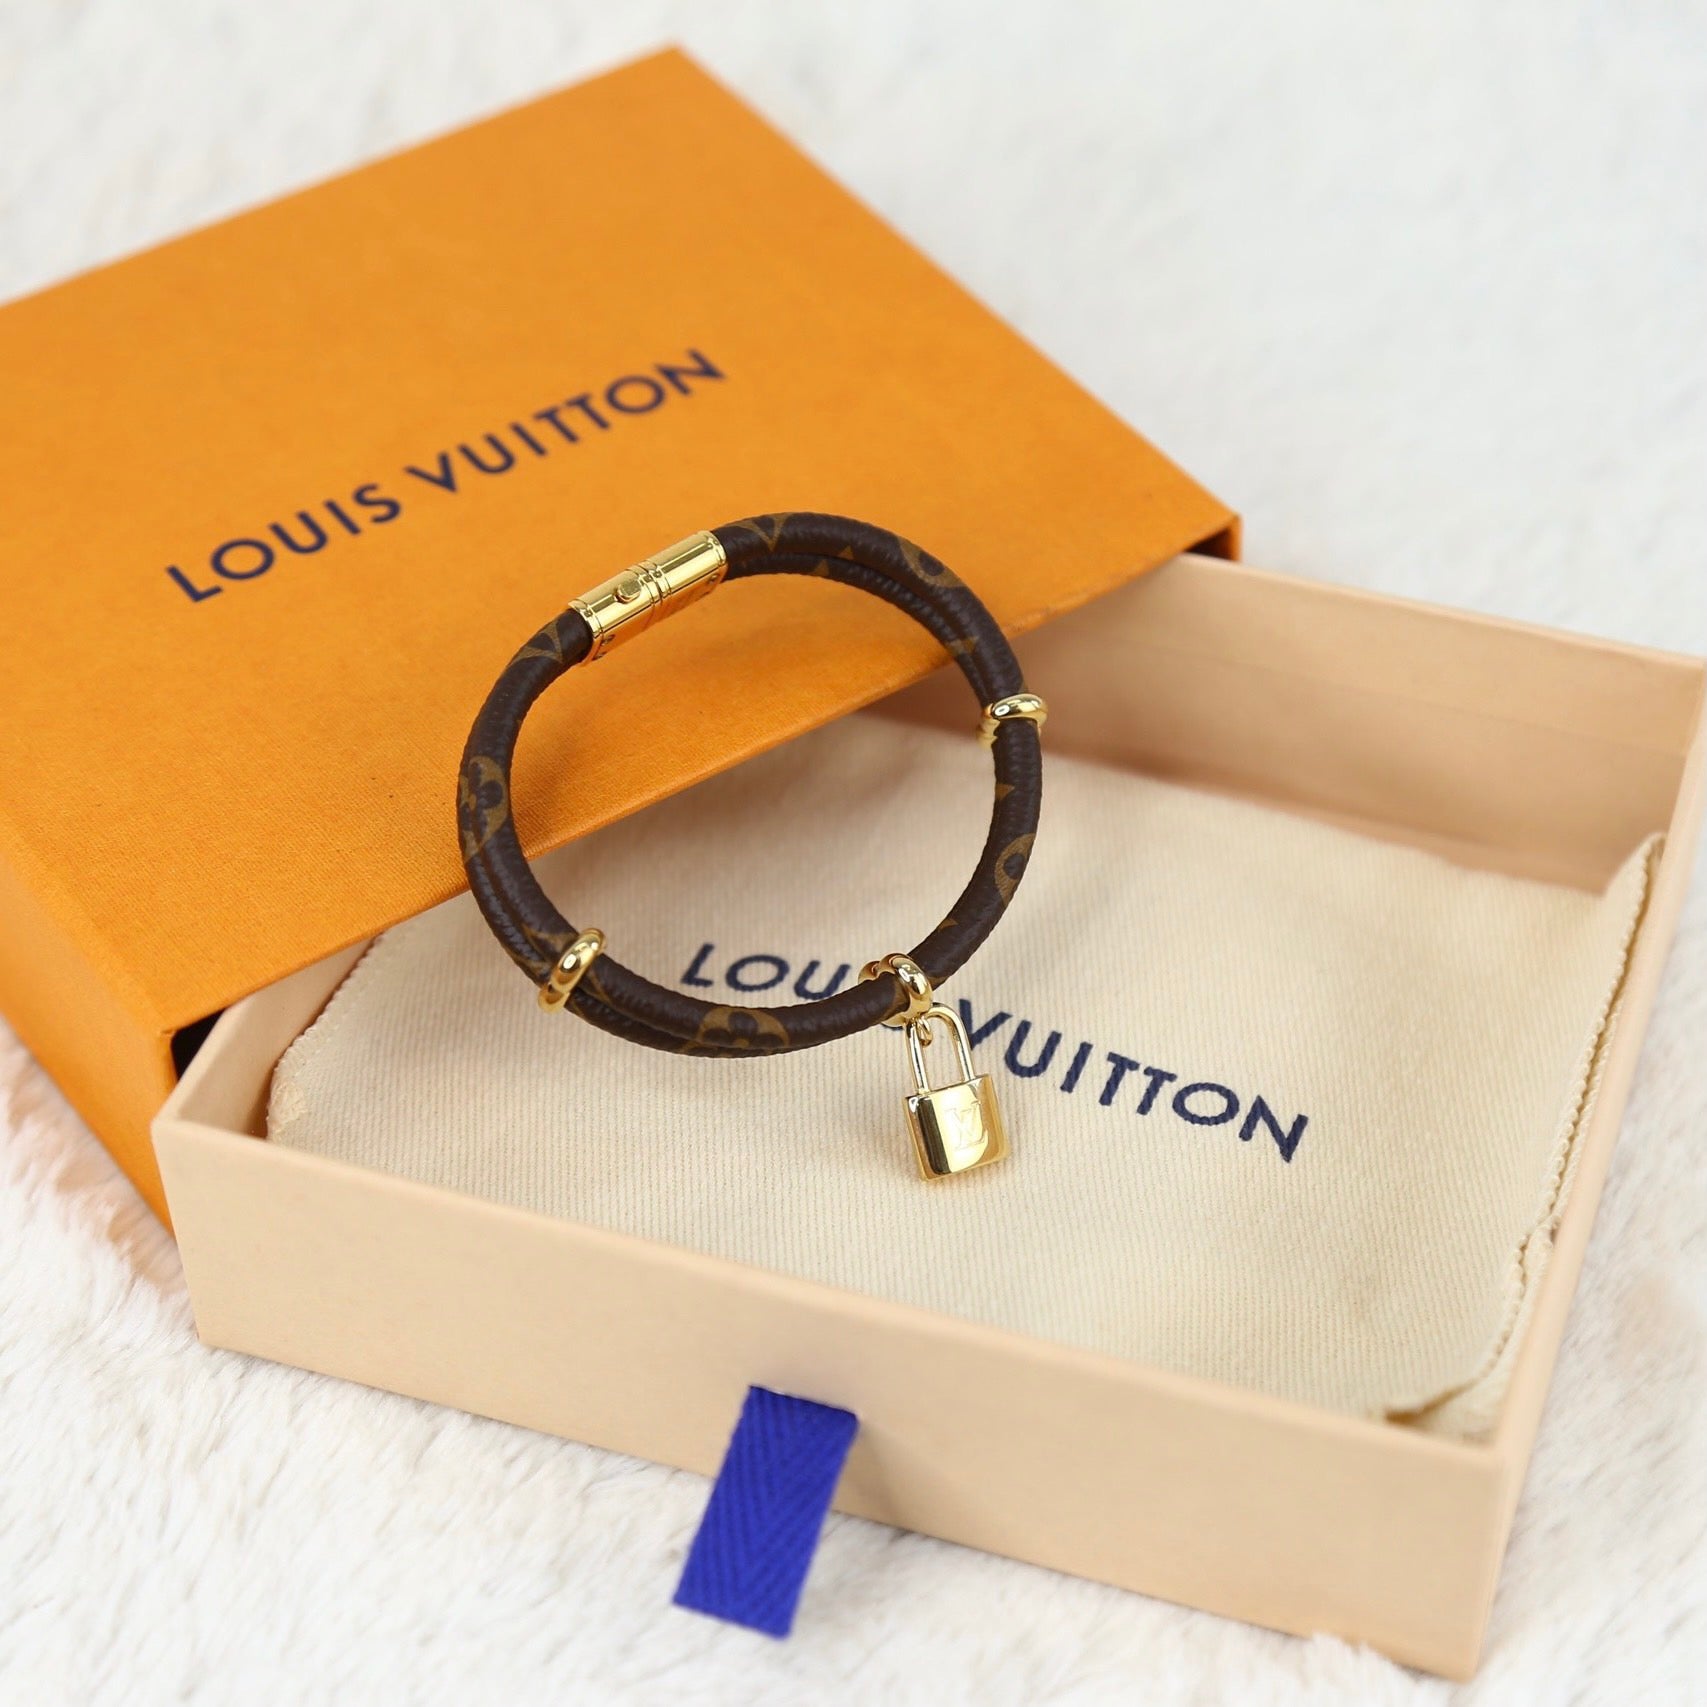 Shop Louis Vuitton Bangles Costume Jewelry Unisex Leather Bracelets  (M8124F, M8011E, M8048E, M6220F, M6758E, M6442F, M6451F) by naganon